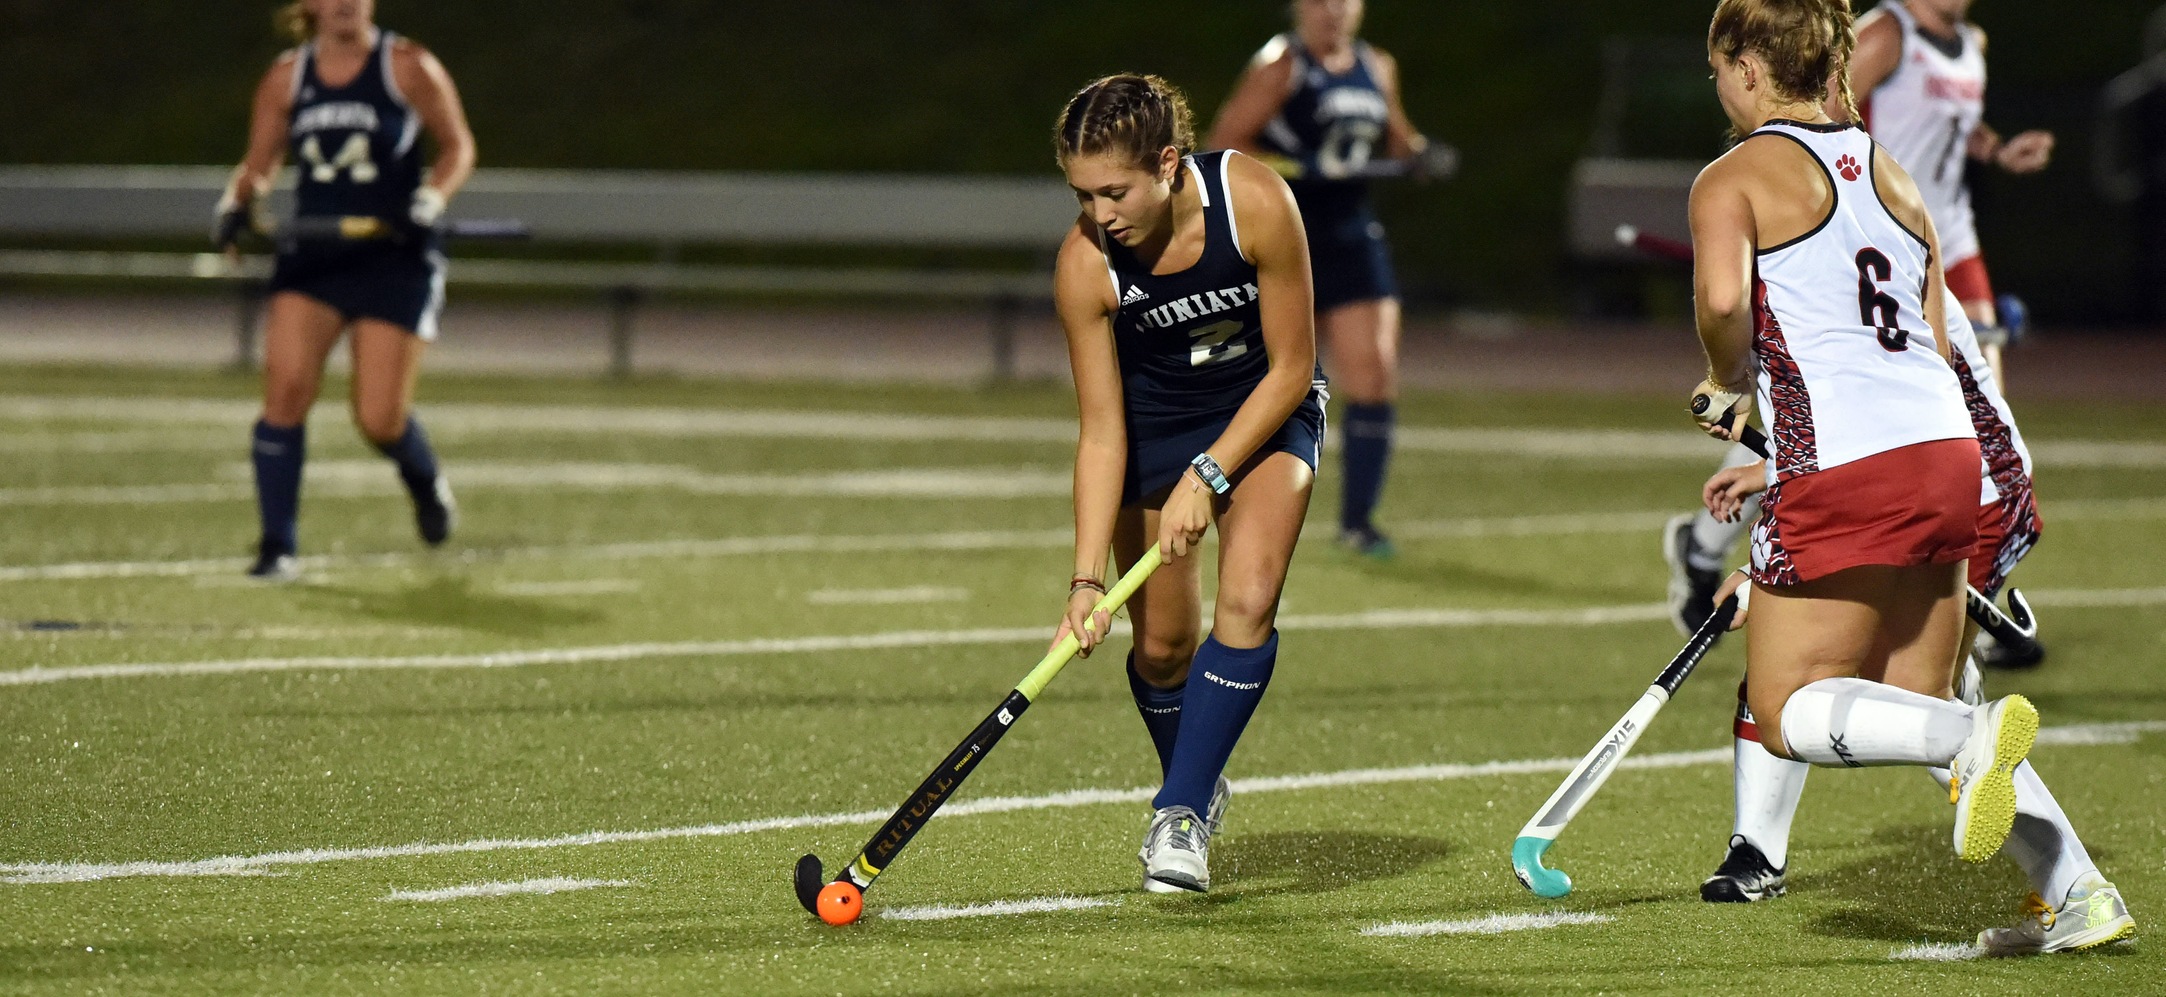 Grace Alexander scored two goals in the Eagles loss at Susquehanna.